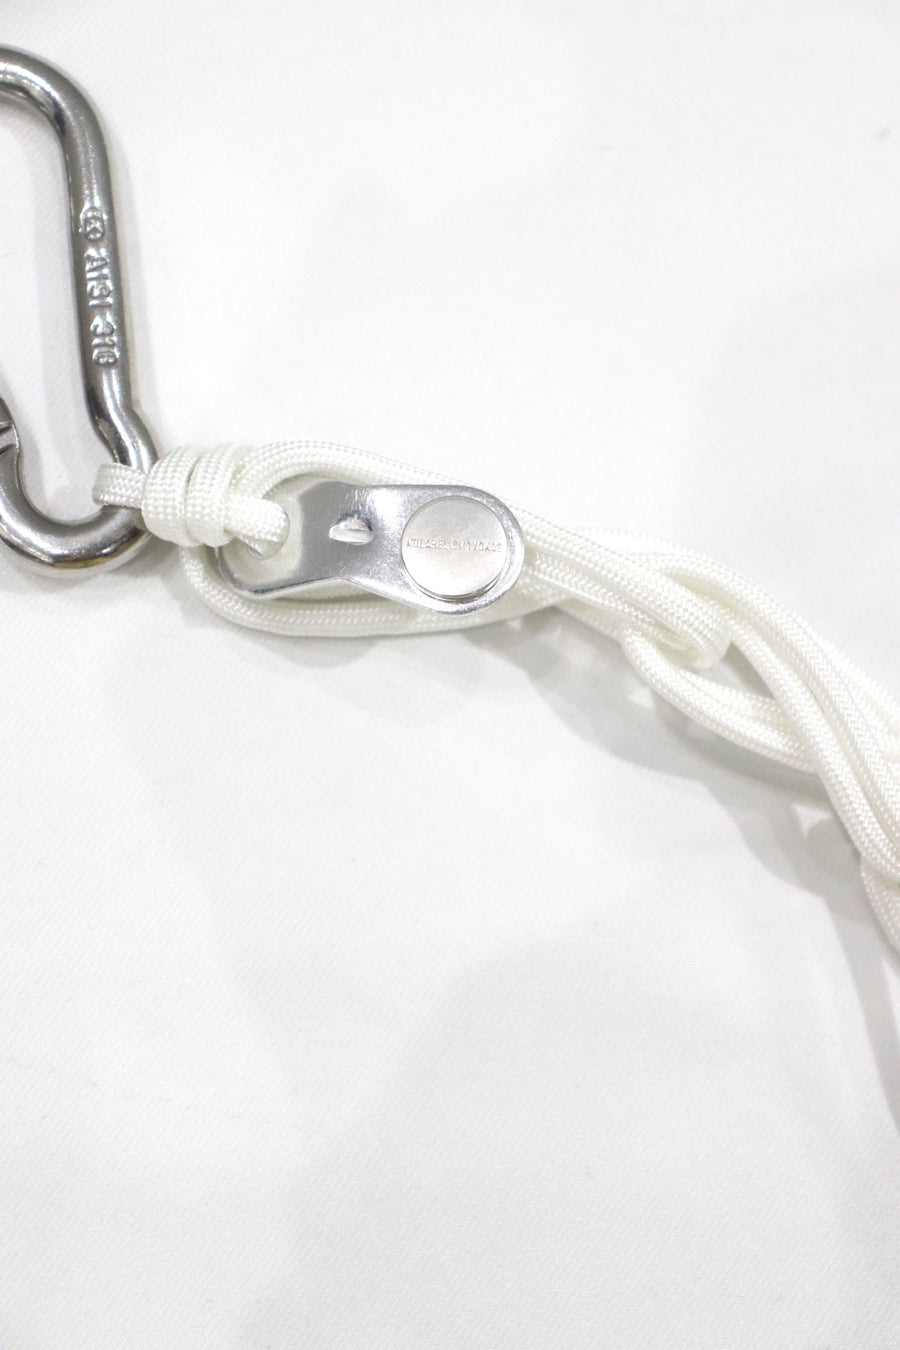 Nulabel's Rope Carabiner Type-1 Off White Mail Order | Palette Art